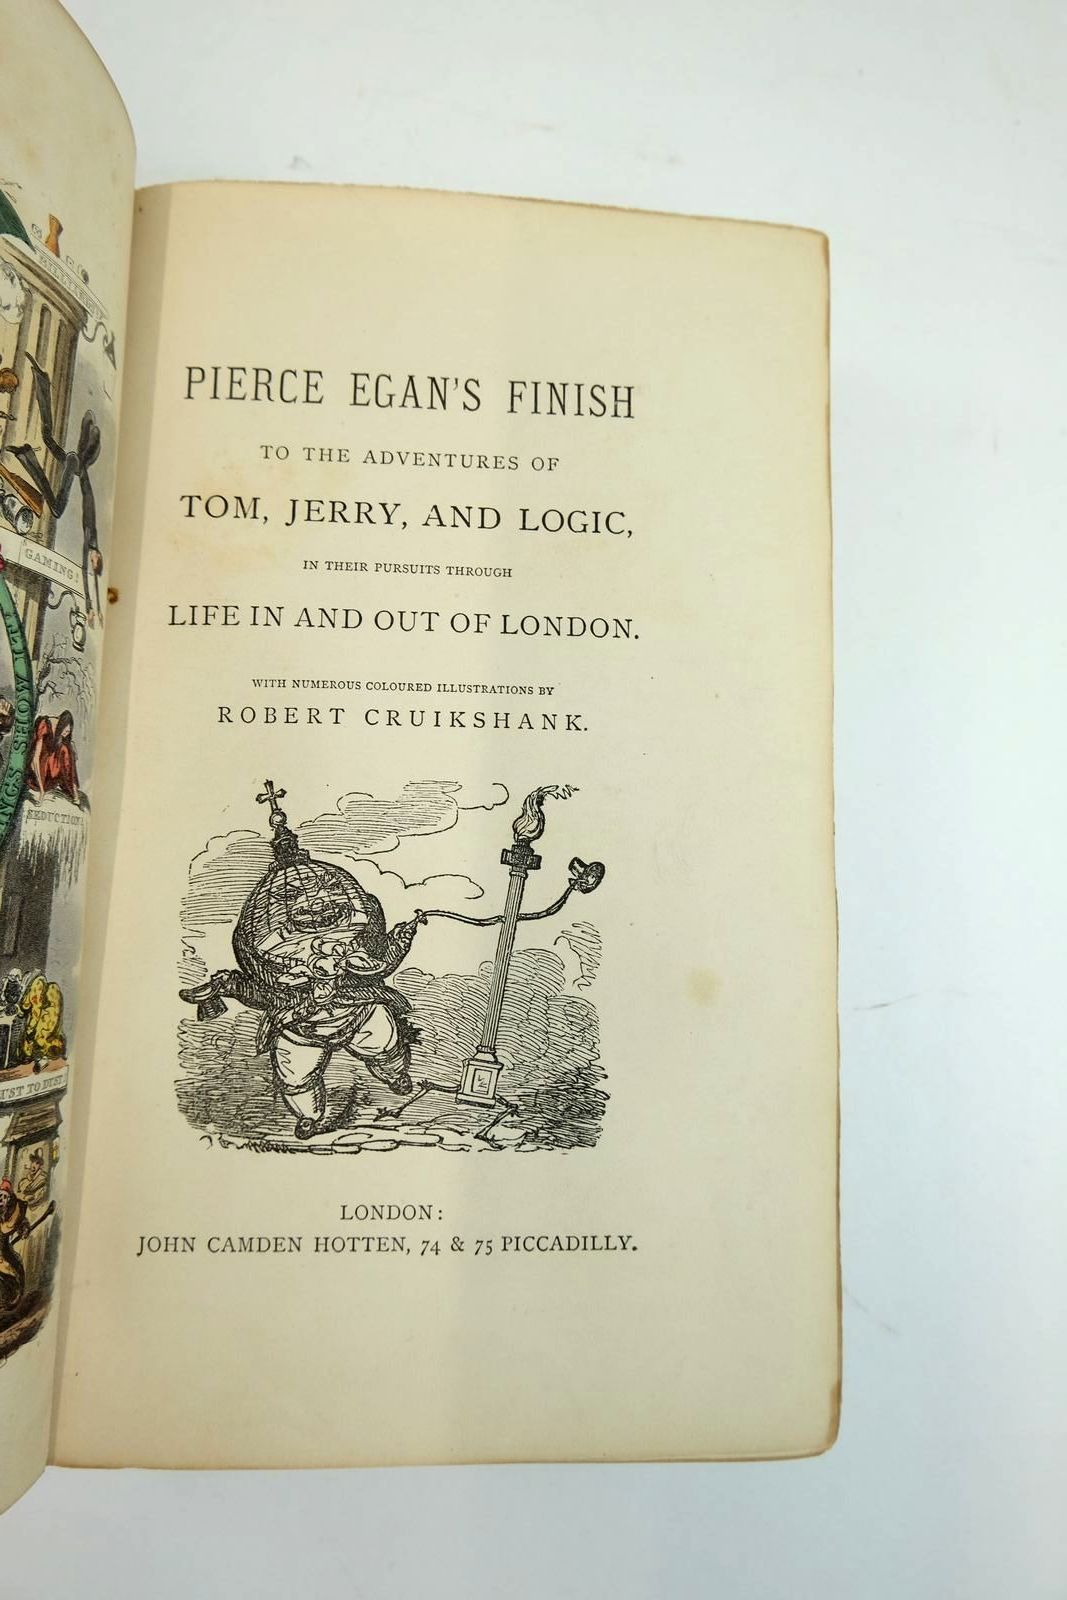 Photo of PIERCE EGAN'S FINISH TO THE ADVENTURES OF TOM, JERRY, AND LOGIC, IN THEIR PURSUITS THROUGH LIFE IN AND OUT OF LONDON written by Egan, Pierce illustrated by Cruikshank, Robert published by John Camden Hotten (STOCK CODE: 2134072)  for sale by Stella & Rose's Books